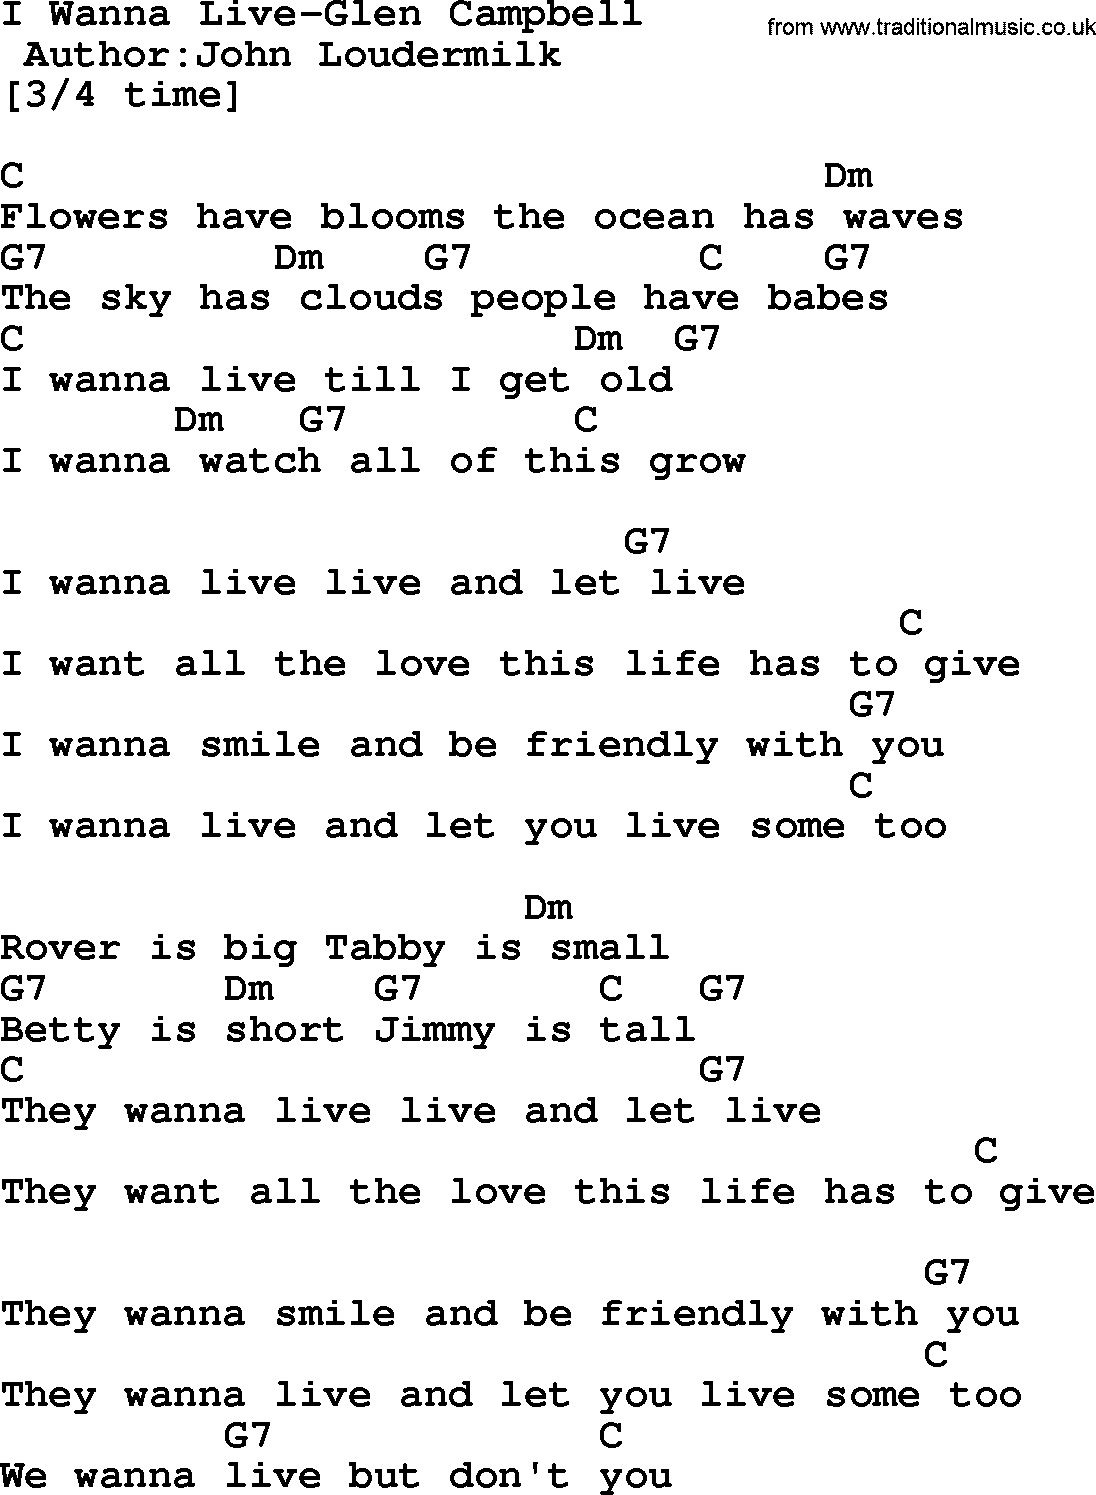 Country music song: I Wanna Live-Glen Campbell lyrics and chords